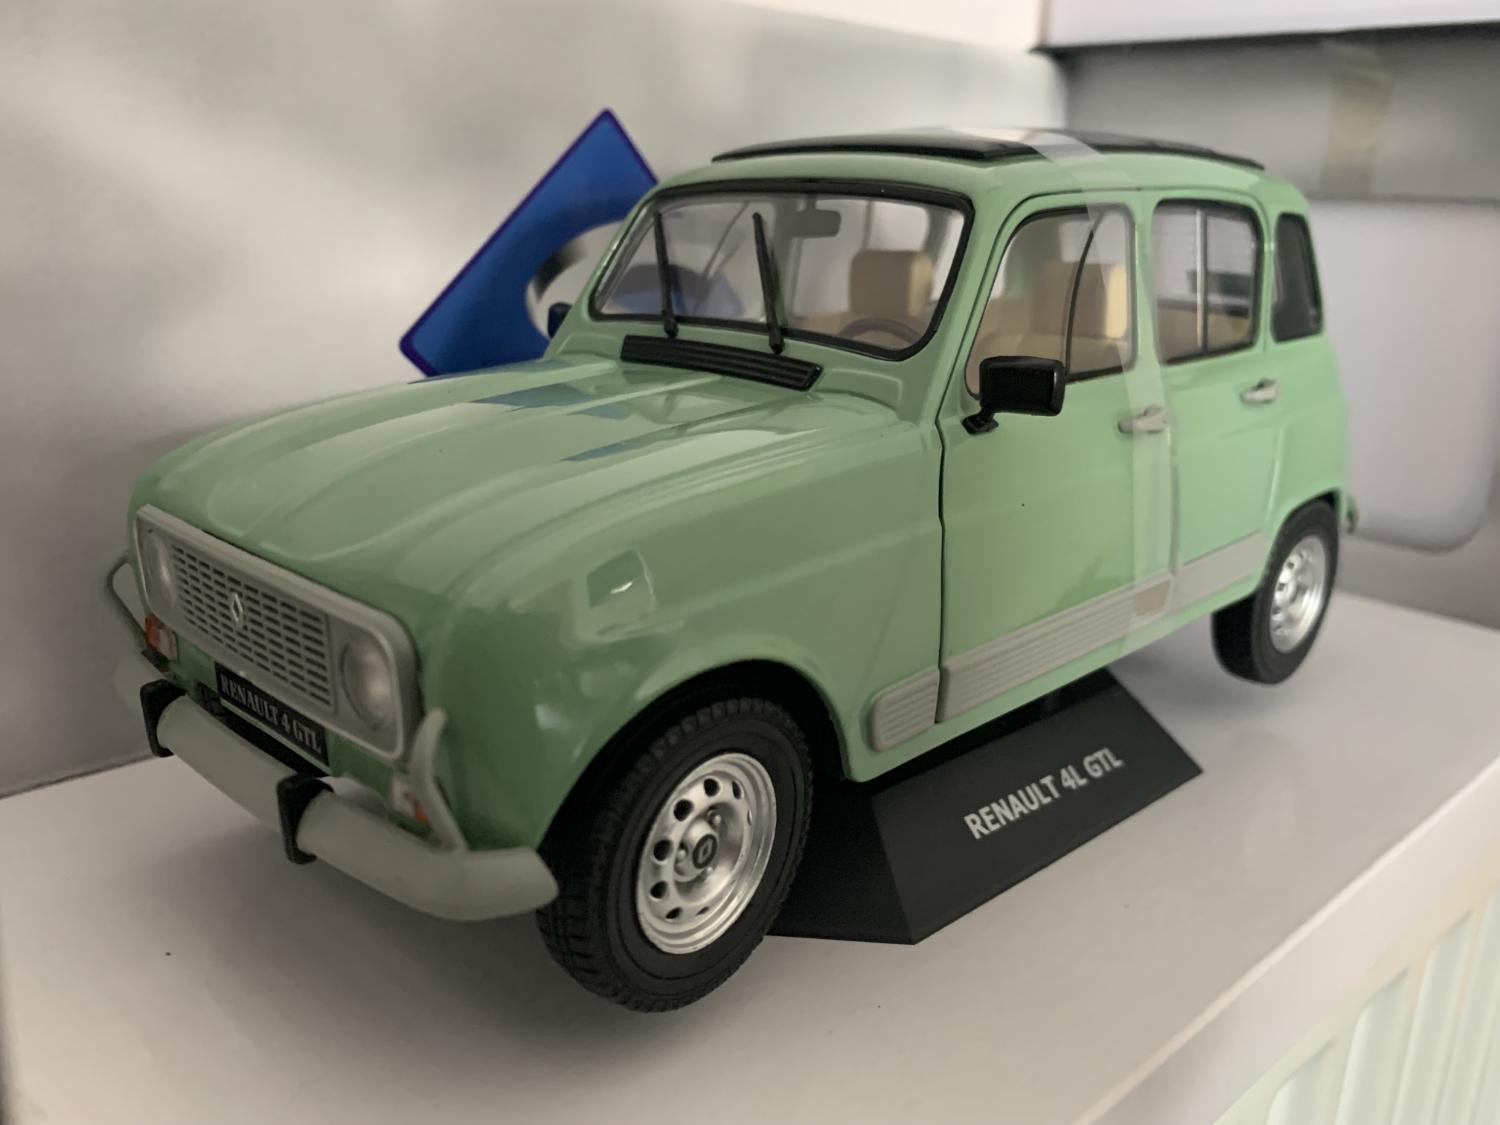 Renault 4L GTL 1978 in green celadon 1:18 scale model from Solido